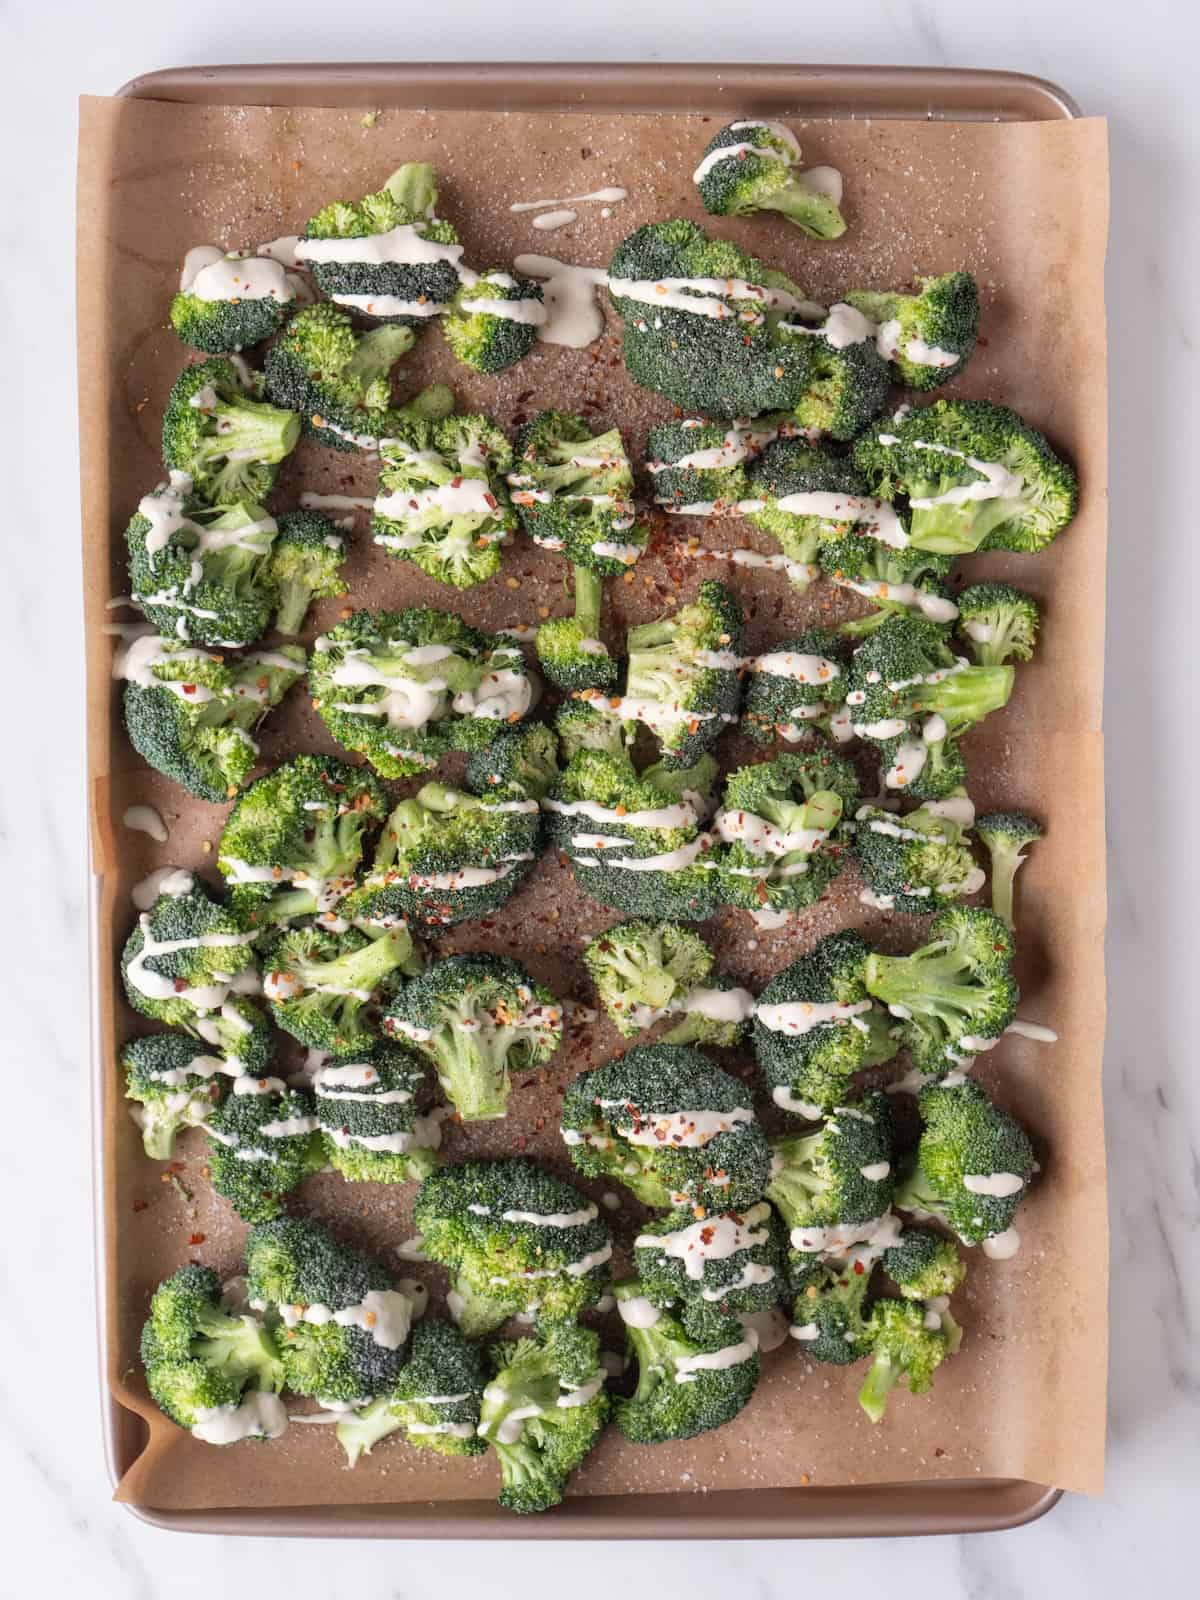 A parchment-lined baking sheet with broccoli florets spread out evenly in a single layer tossed in oil, salt, pepper and red pepper flakes, with a drizzle of tahini sauce, made with lemon and garlic.